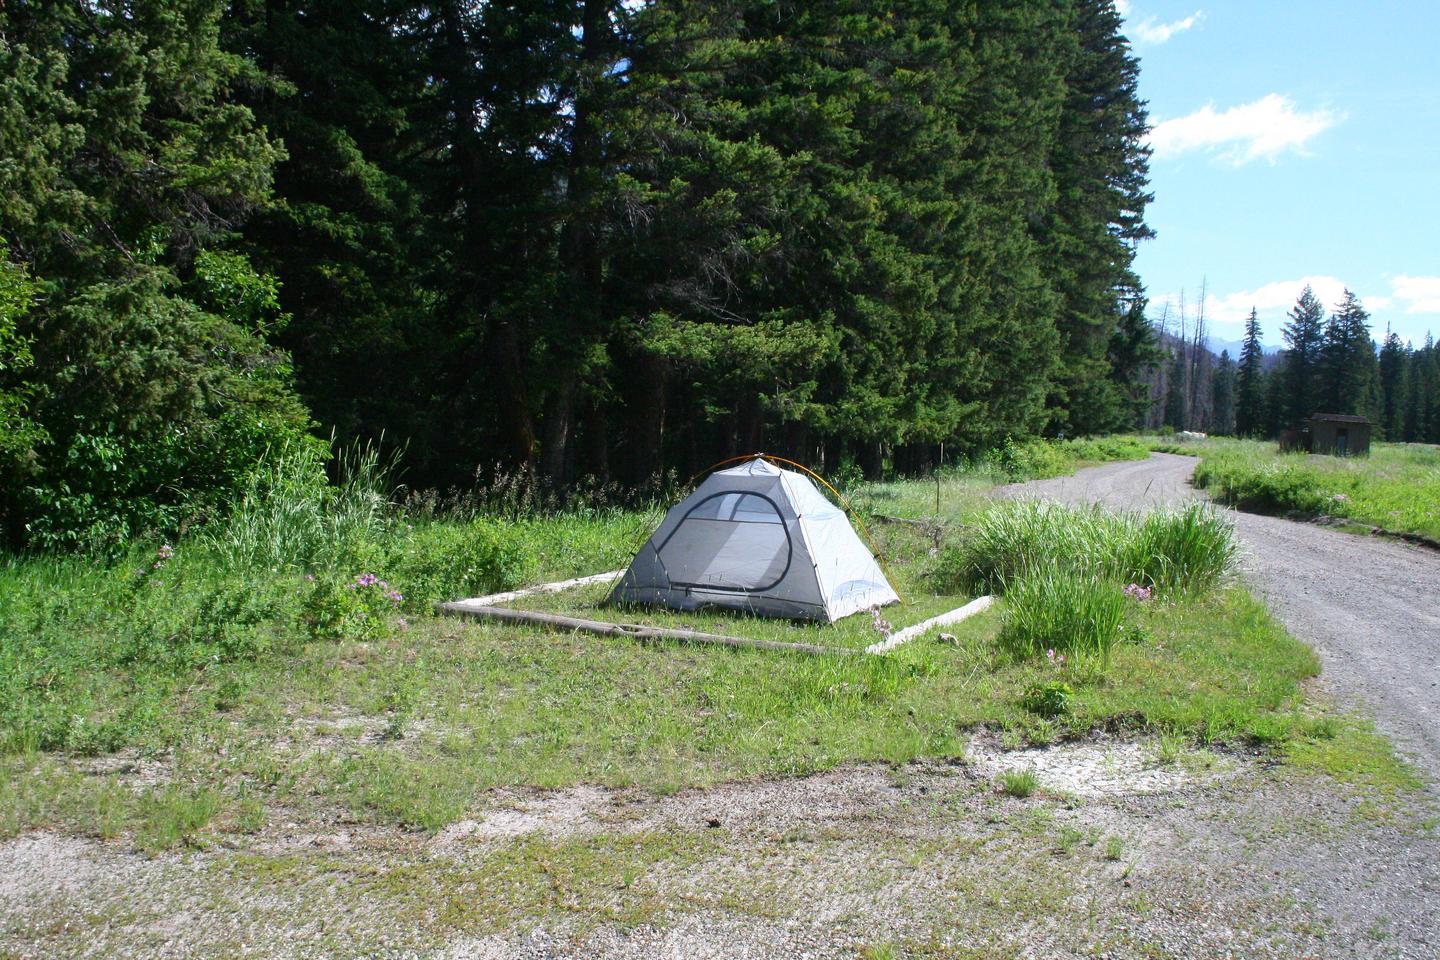 Slough Creek Campground Site #9